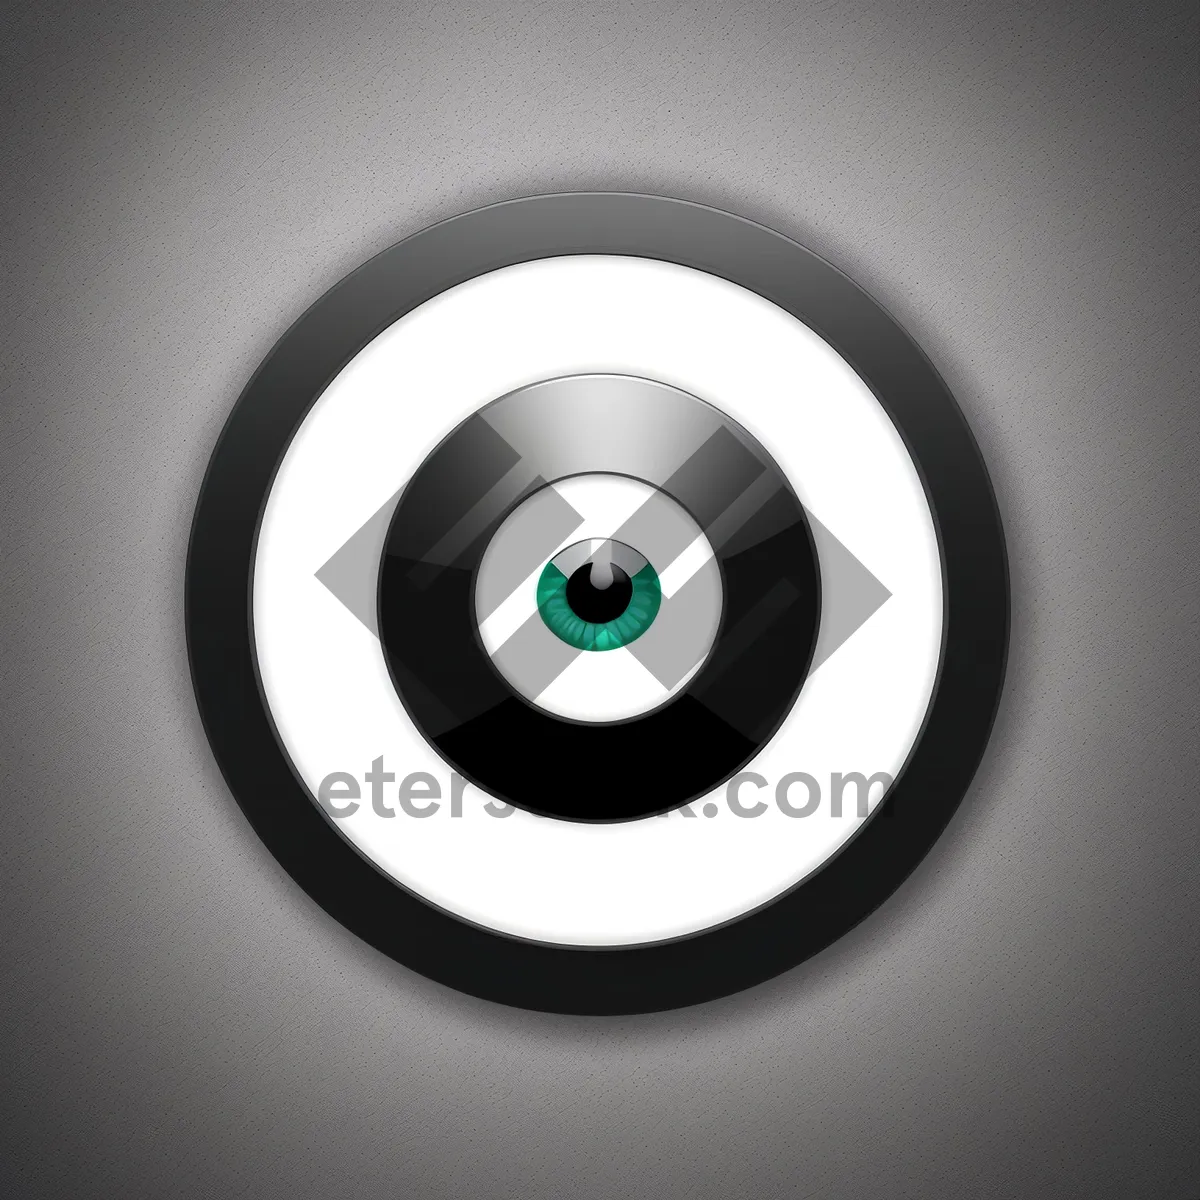 Picture of Modern Shiny Round Web Button with Metallic Shadow